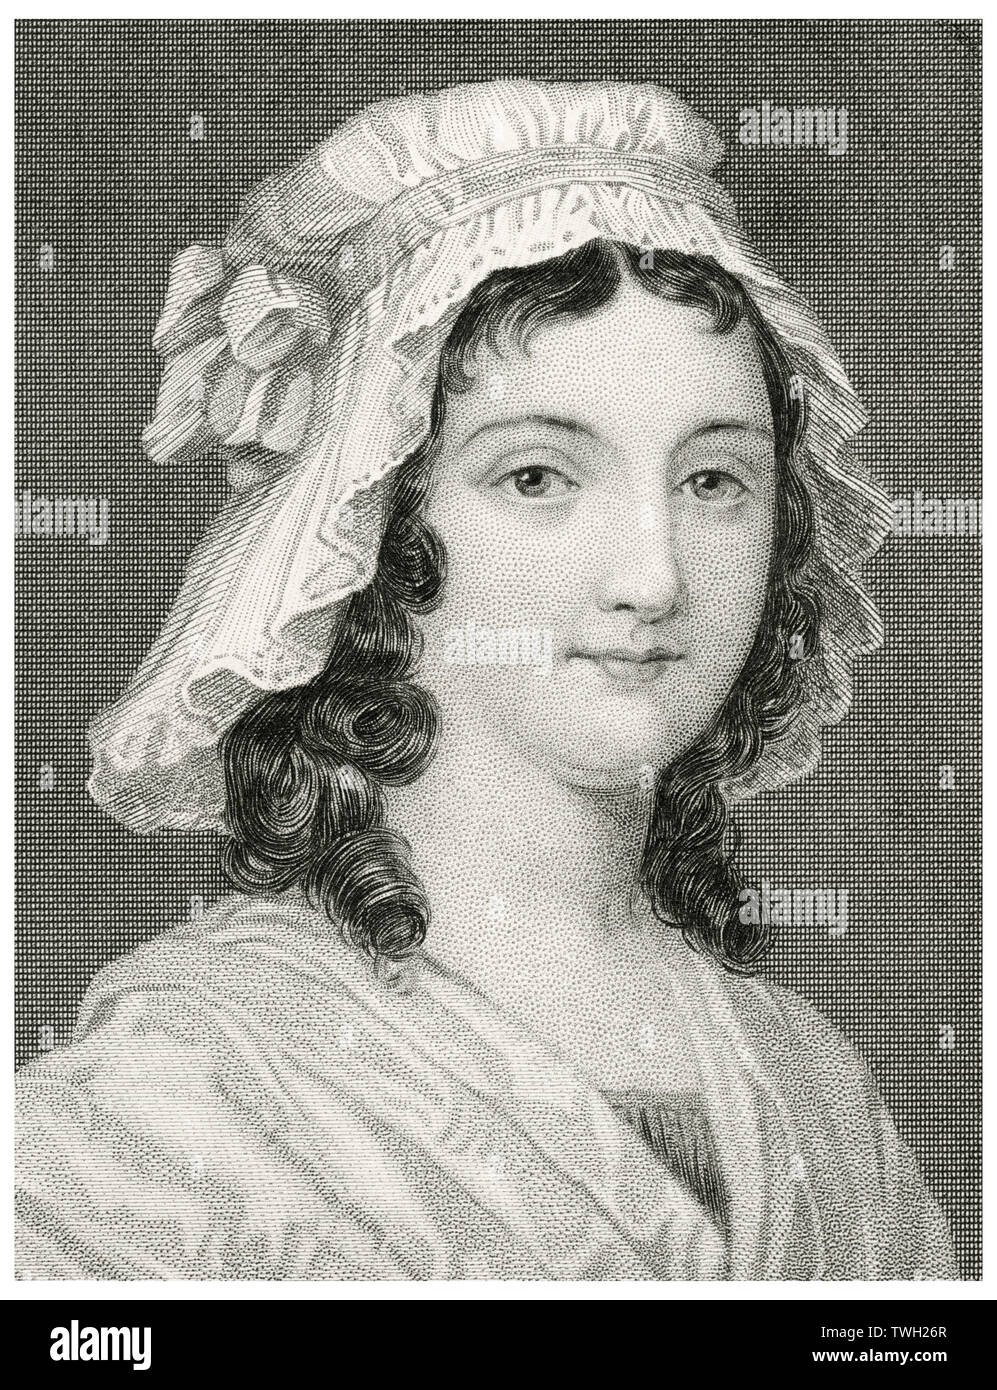 Charlotte Corday (1768-93), Executed by Guillotine for the Assassination of Jacobin Leader Jean-Paul Marat during French Revolution, Head and Shoulders Portrait, Steel Engraving, Portrait Gallery of Eminent Men and Women of Europe and America by Evert A. Duyckinck, Published by Henry J. Johnson, Johnson, Wilson & Company, New York, 1873 Stock Photo